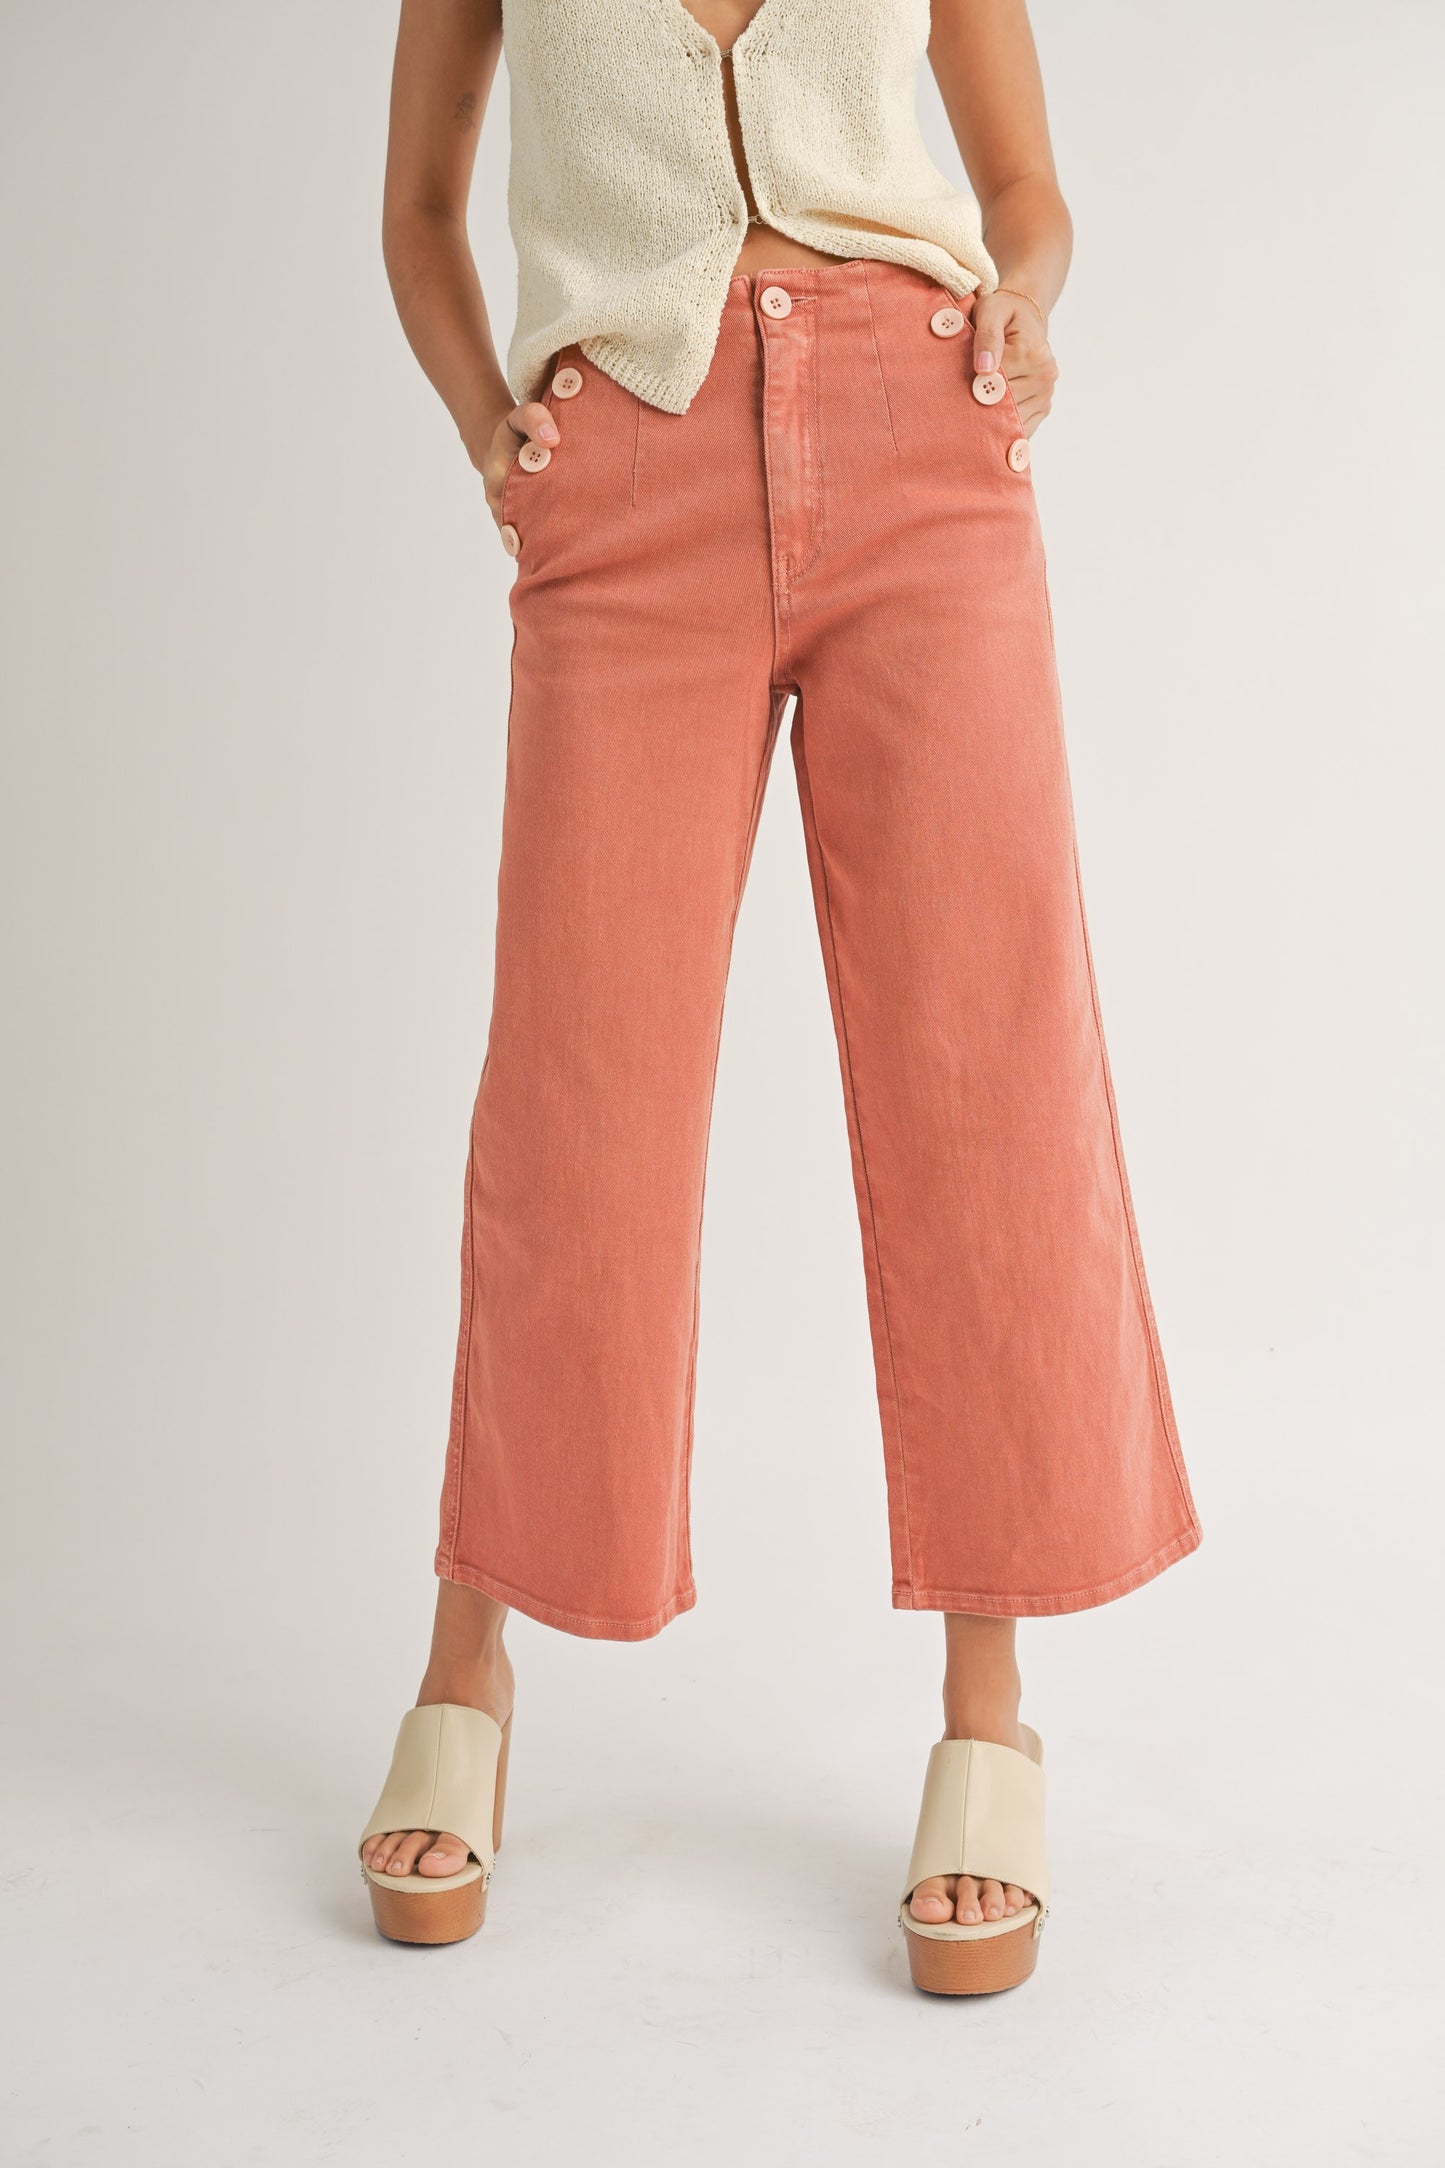 Washed Button Detail Pants